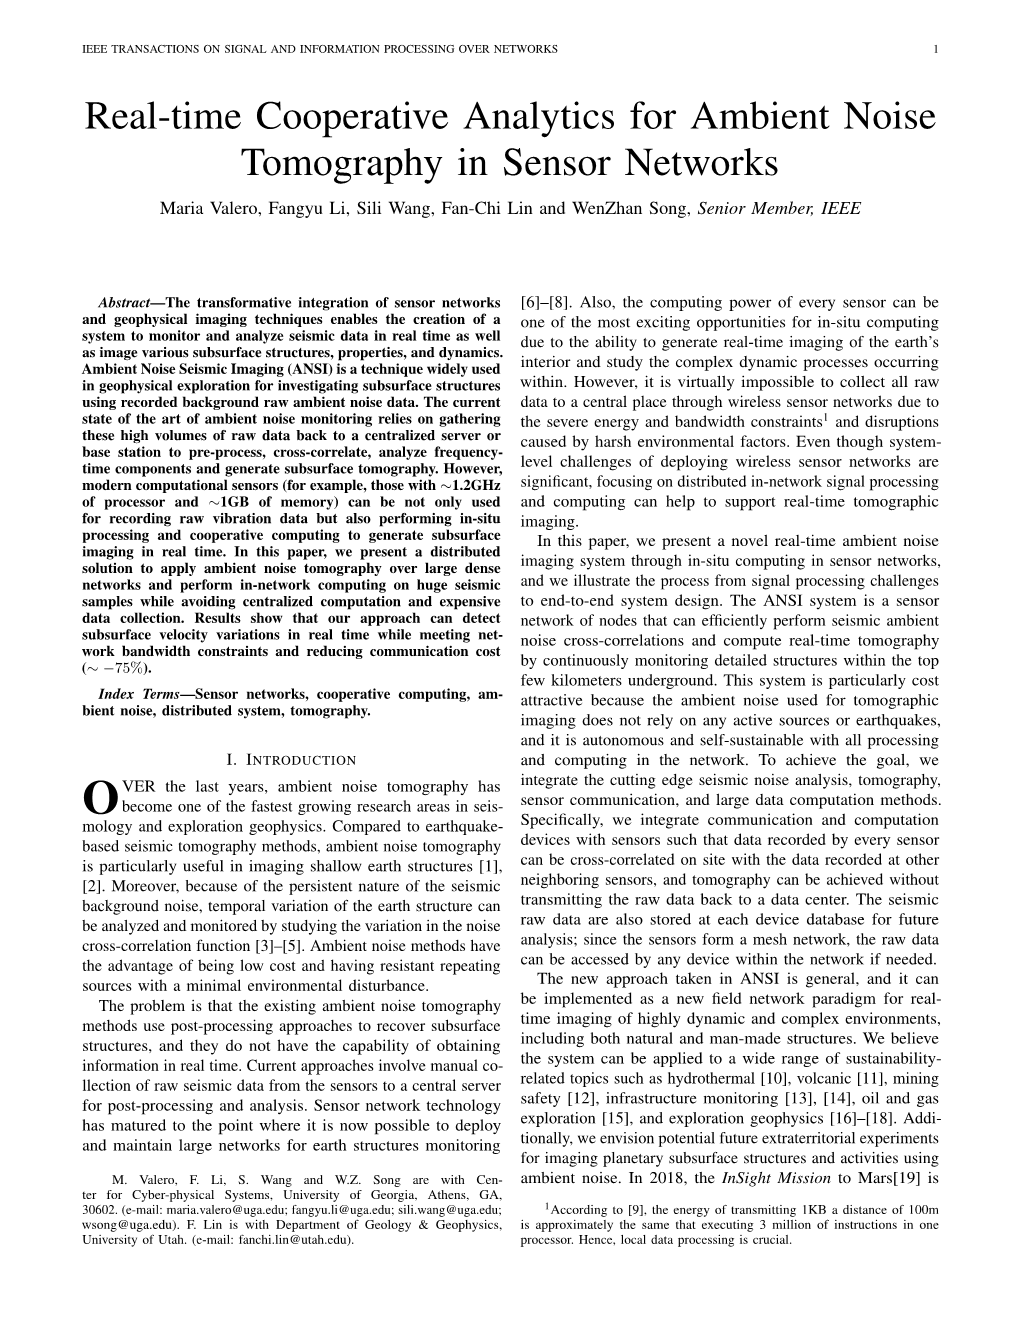 Real-Time Cooperative Analytics for Ambient Noise Tomography in Sensor Networks Maria Valero, Fangyu Li, Sili Wang, Fan-Chi Lin and Wenzhan Song, Senior Member, IEEE